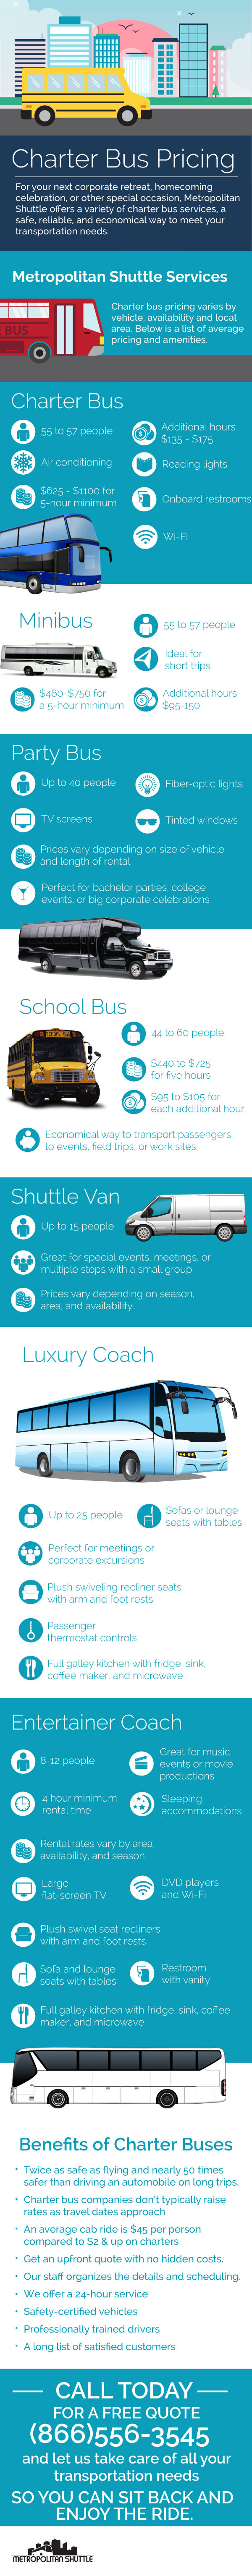 Charter Bus Pricing 